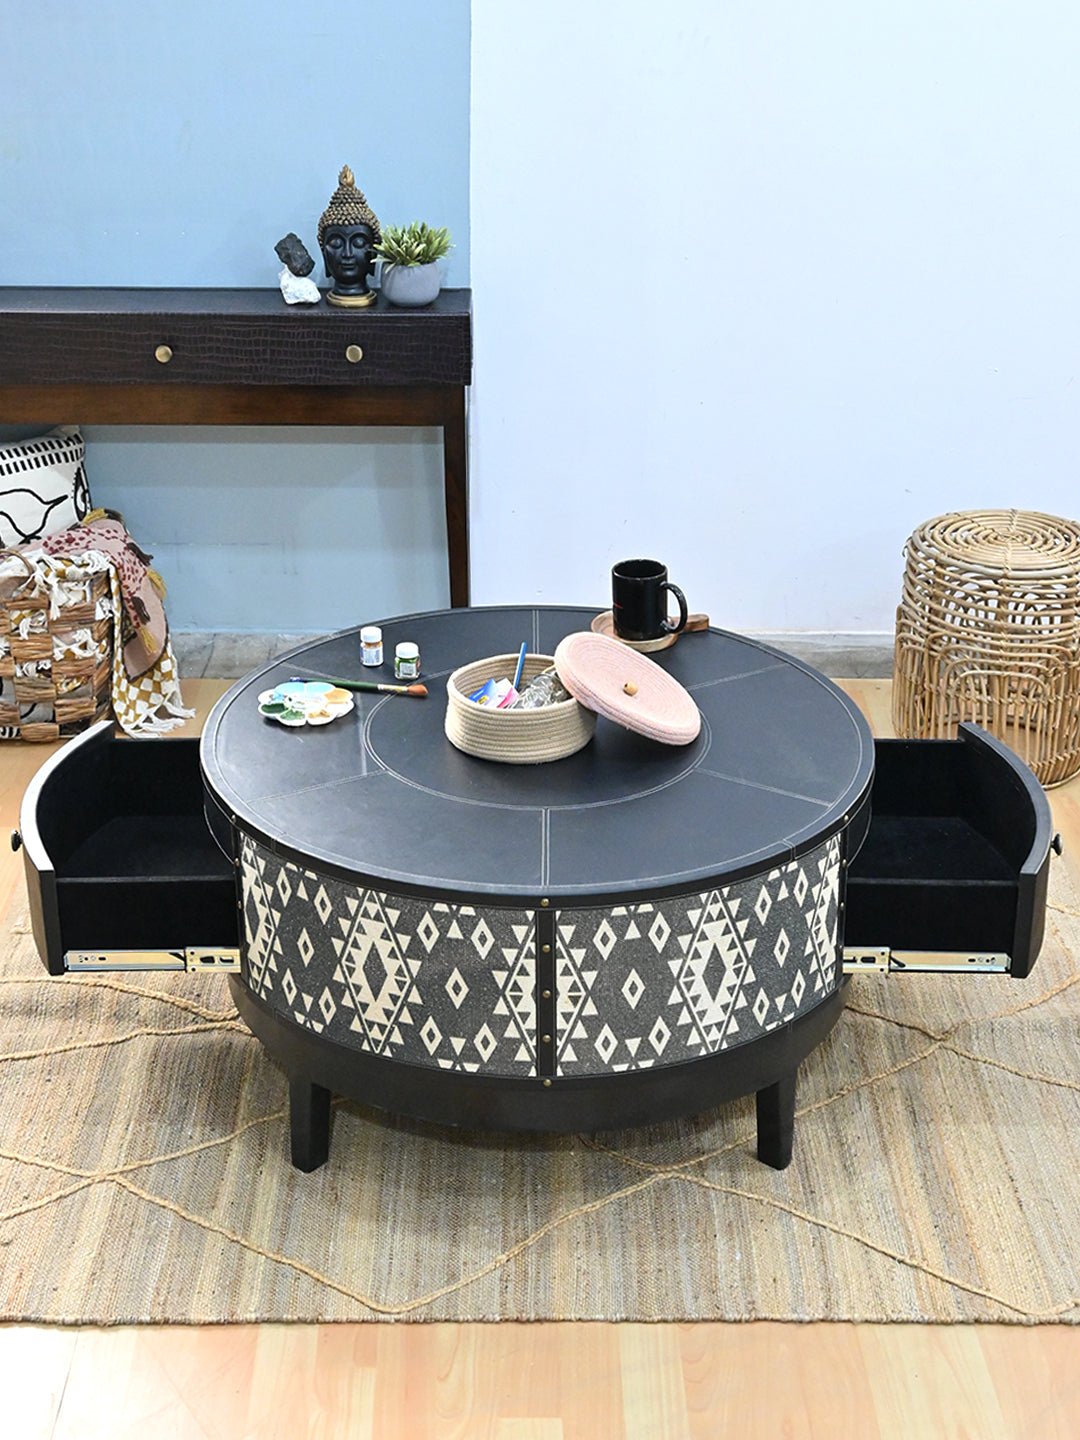 ROUND WOODEN COFFEE TABLE - LEATHER AND DIGITAL PRINTED FABRIC - ART AVENUE